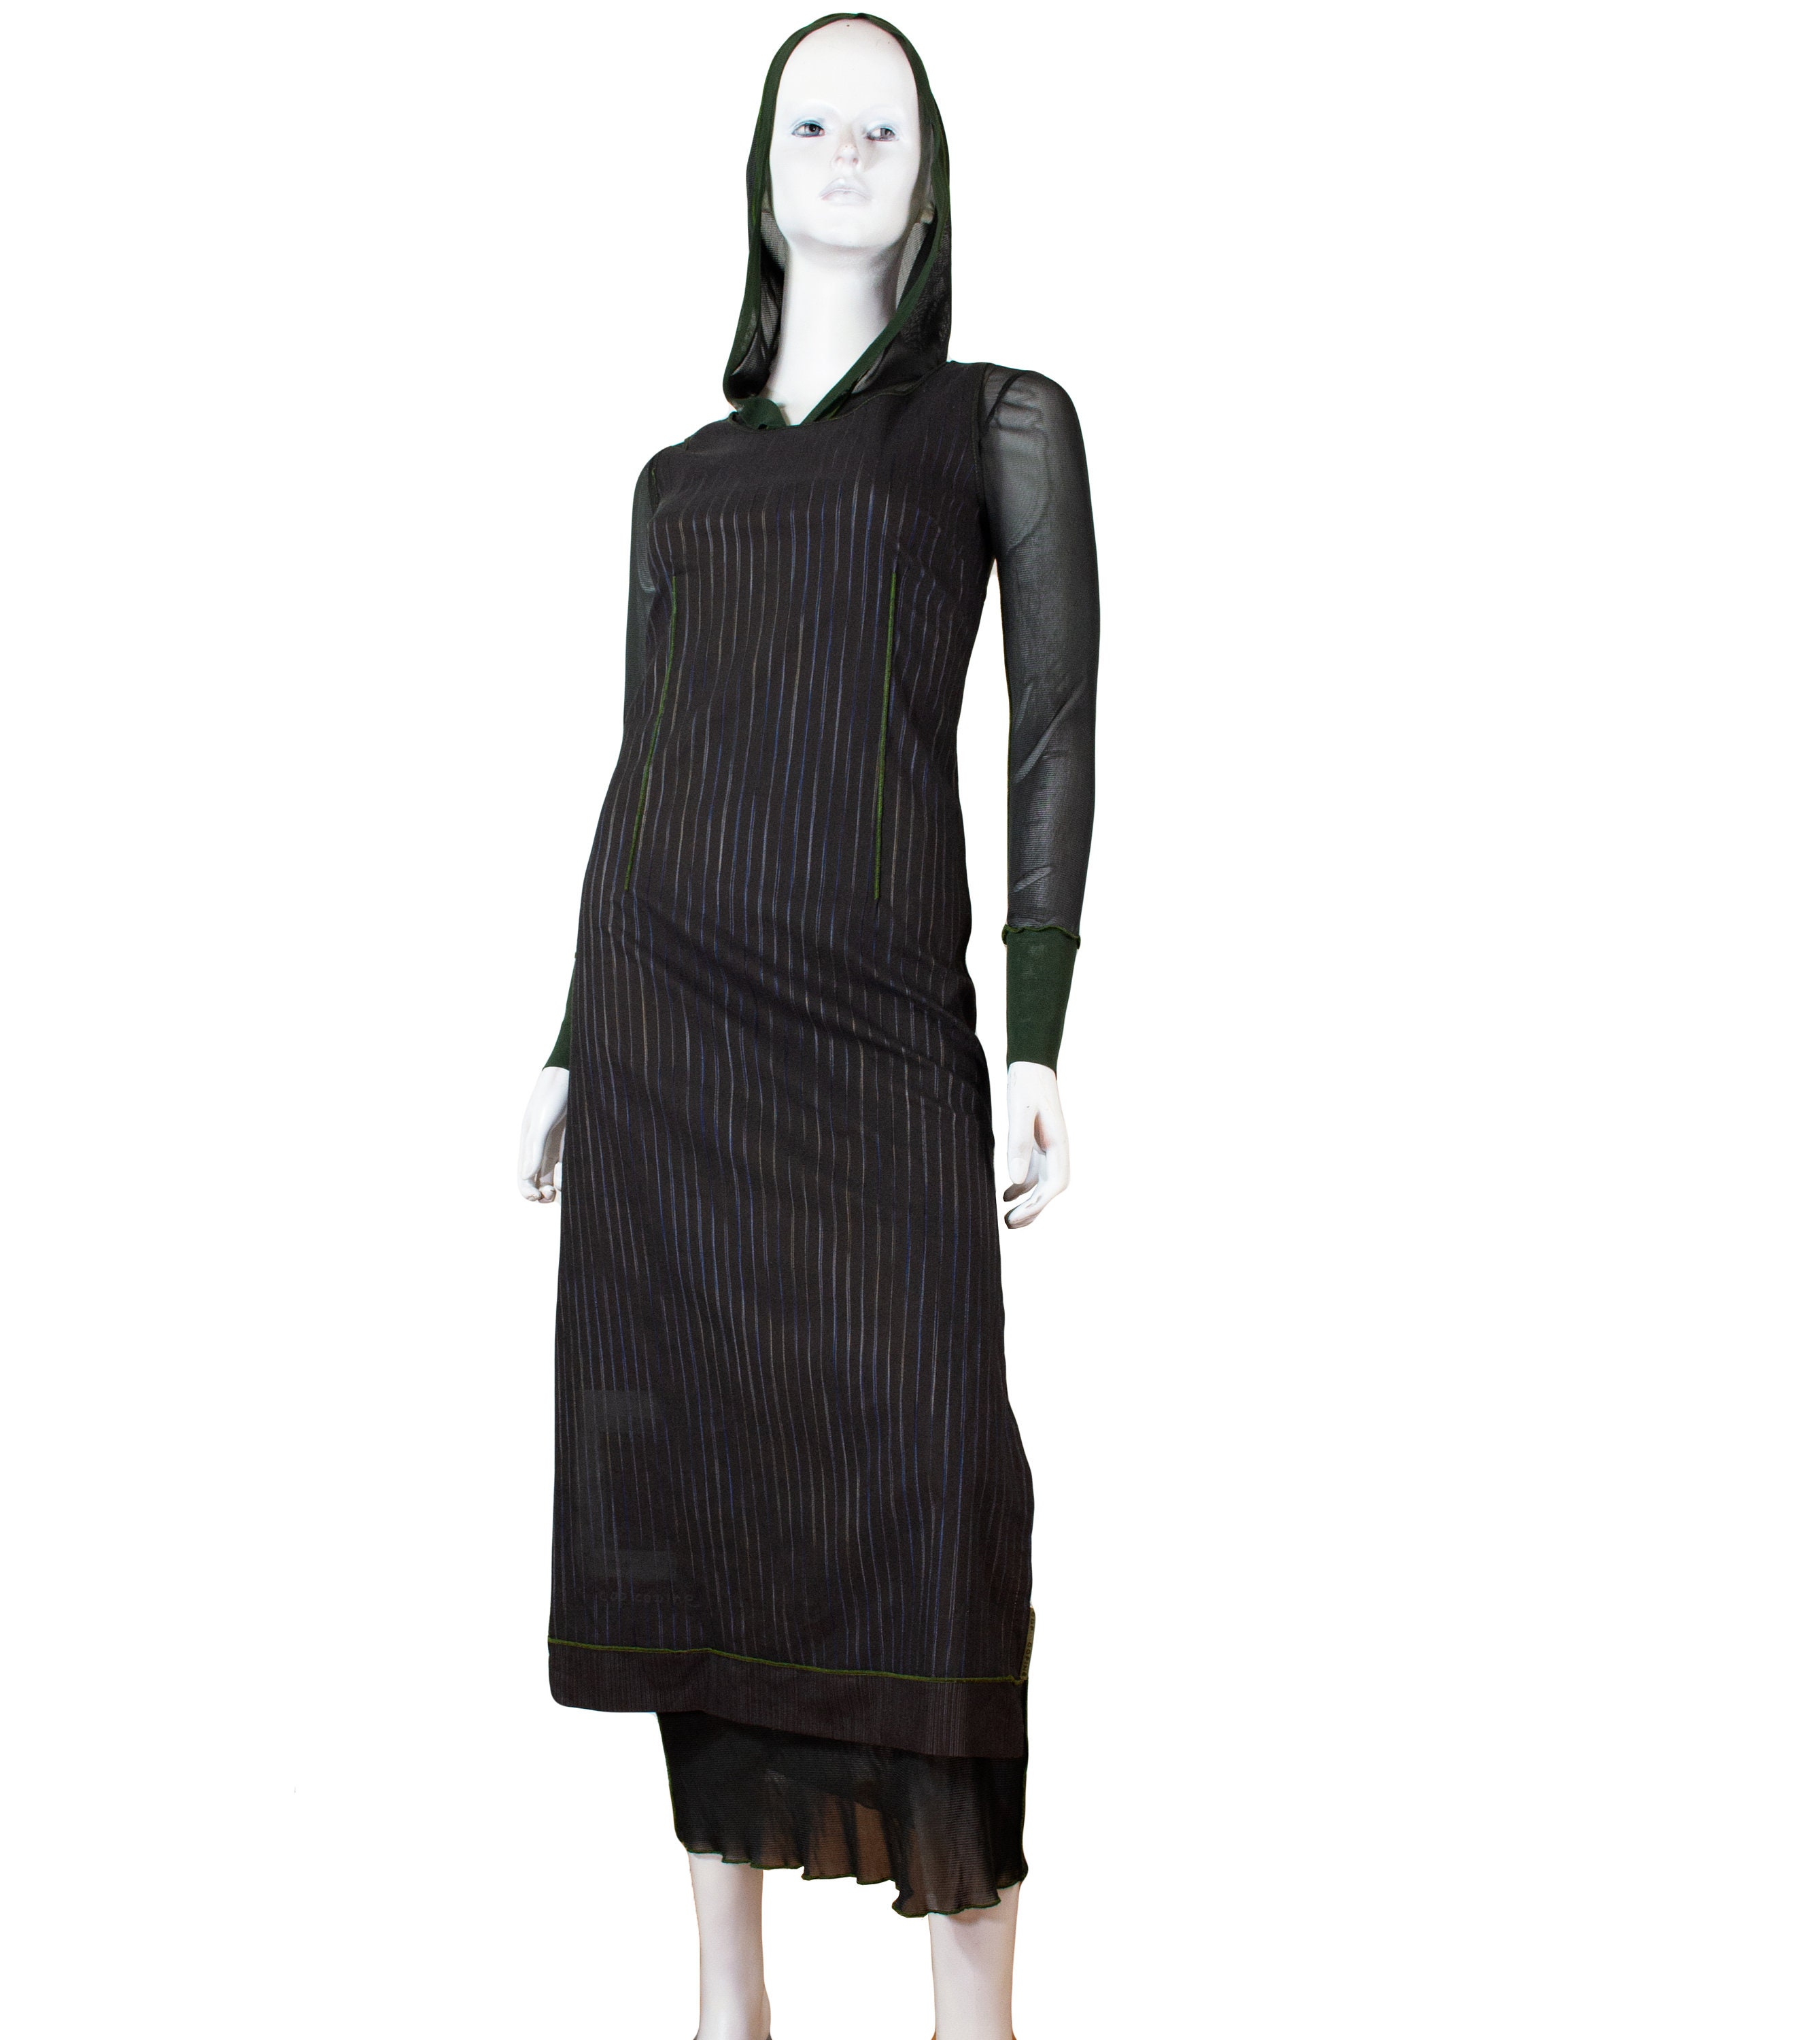 COP COPINE 2 Knit Dresses With Hood and Brown, Green Overdress 